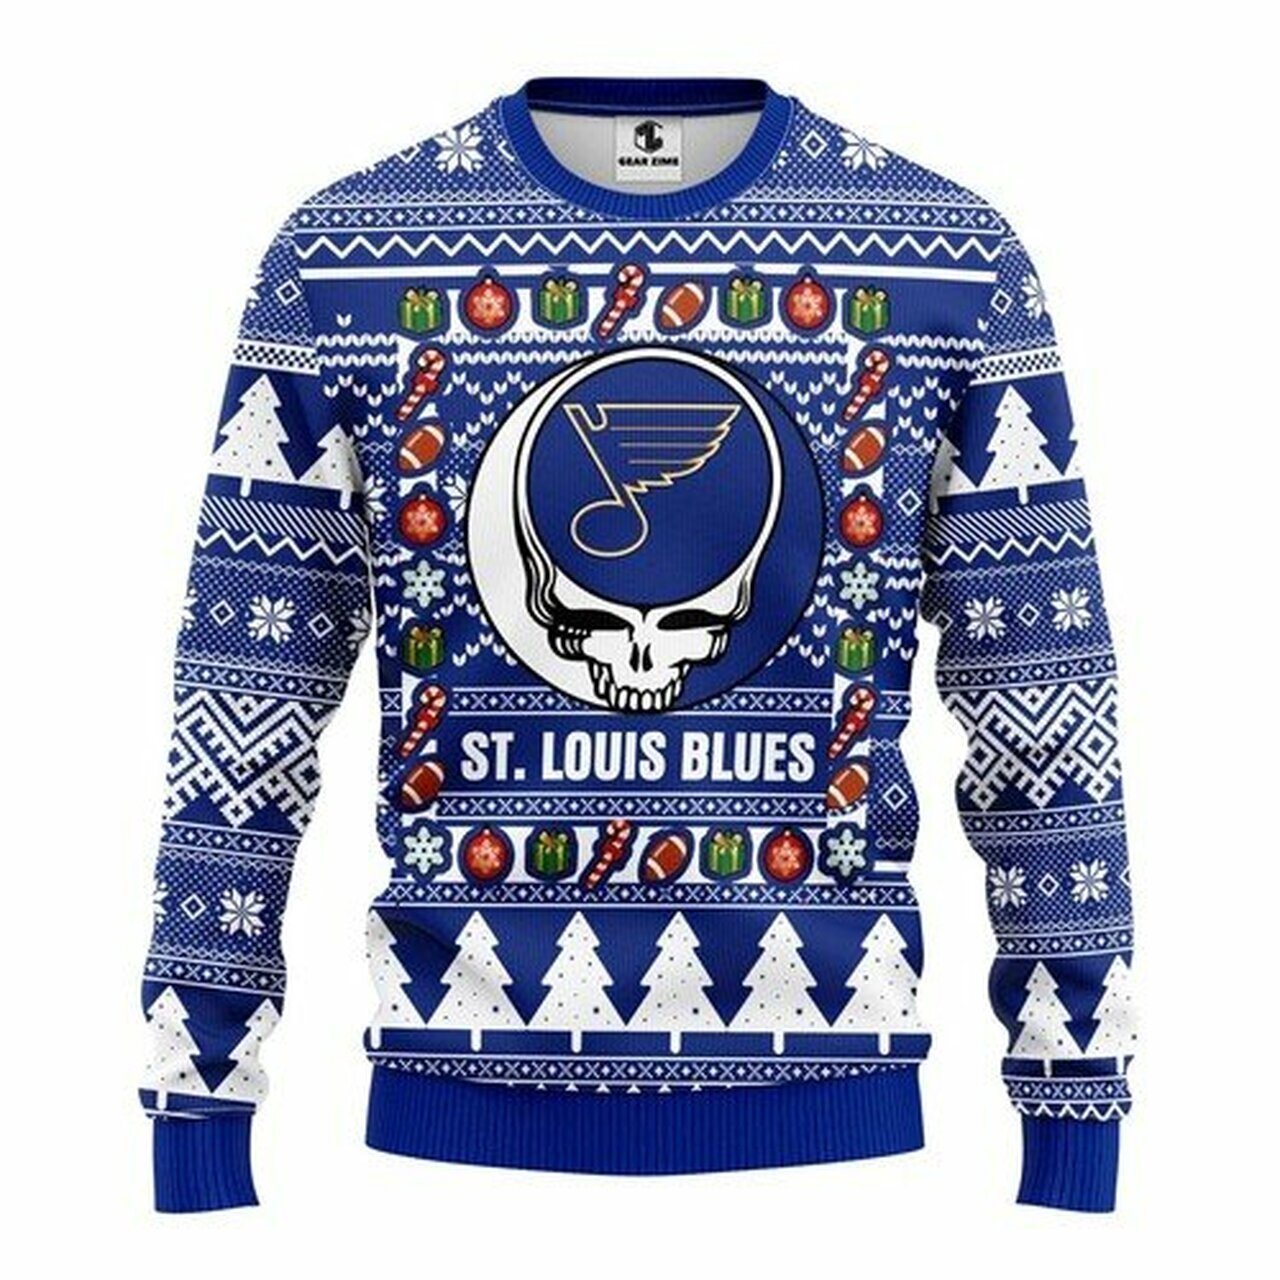 NHL St. Louis Blues Grateful Dead ugly christmas sweater